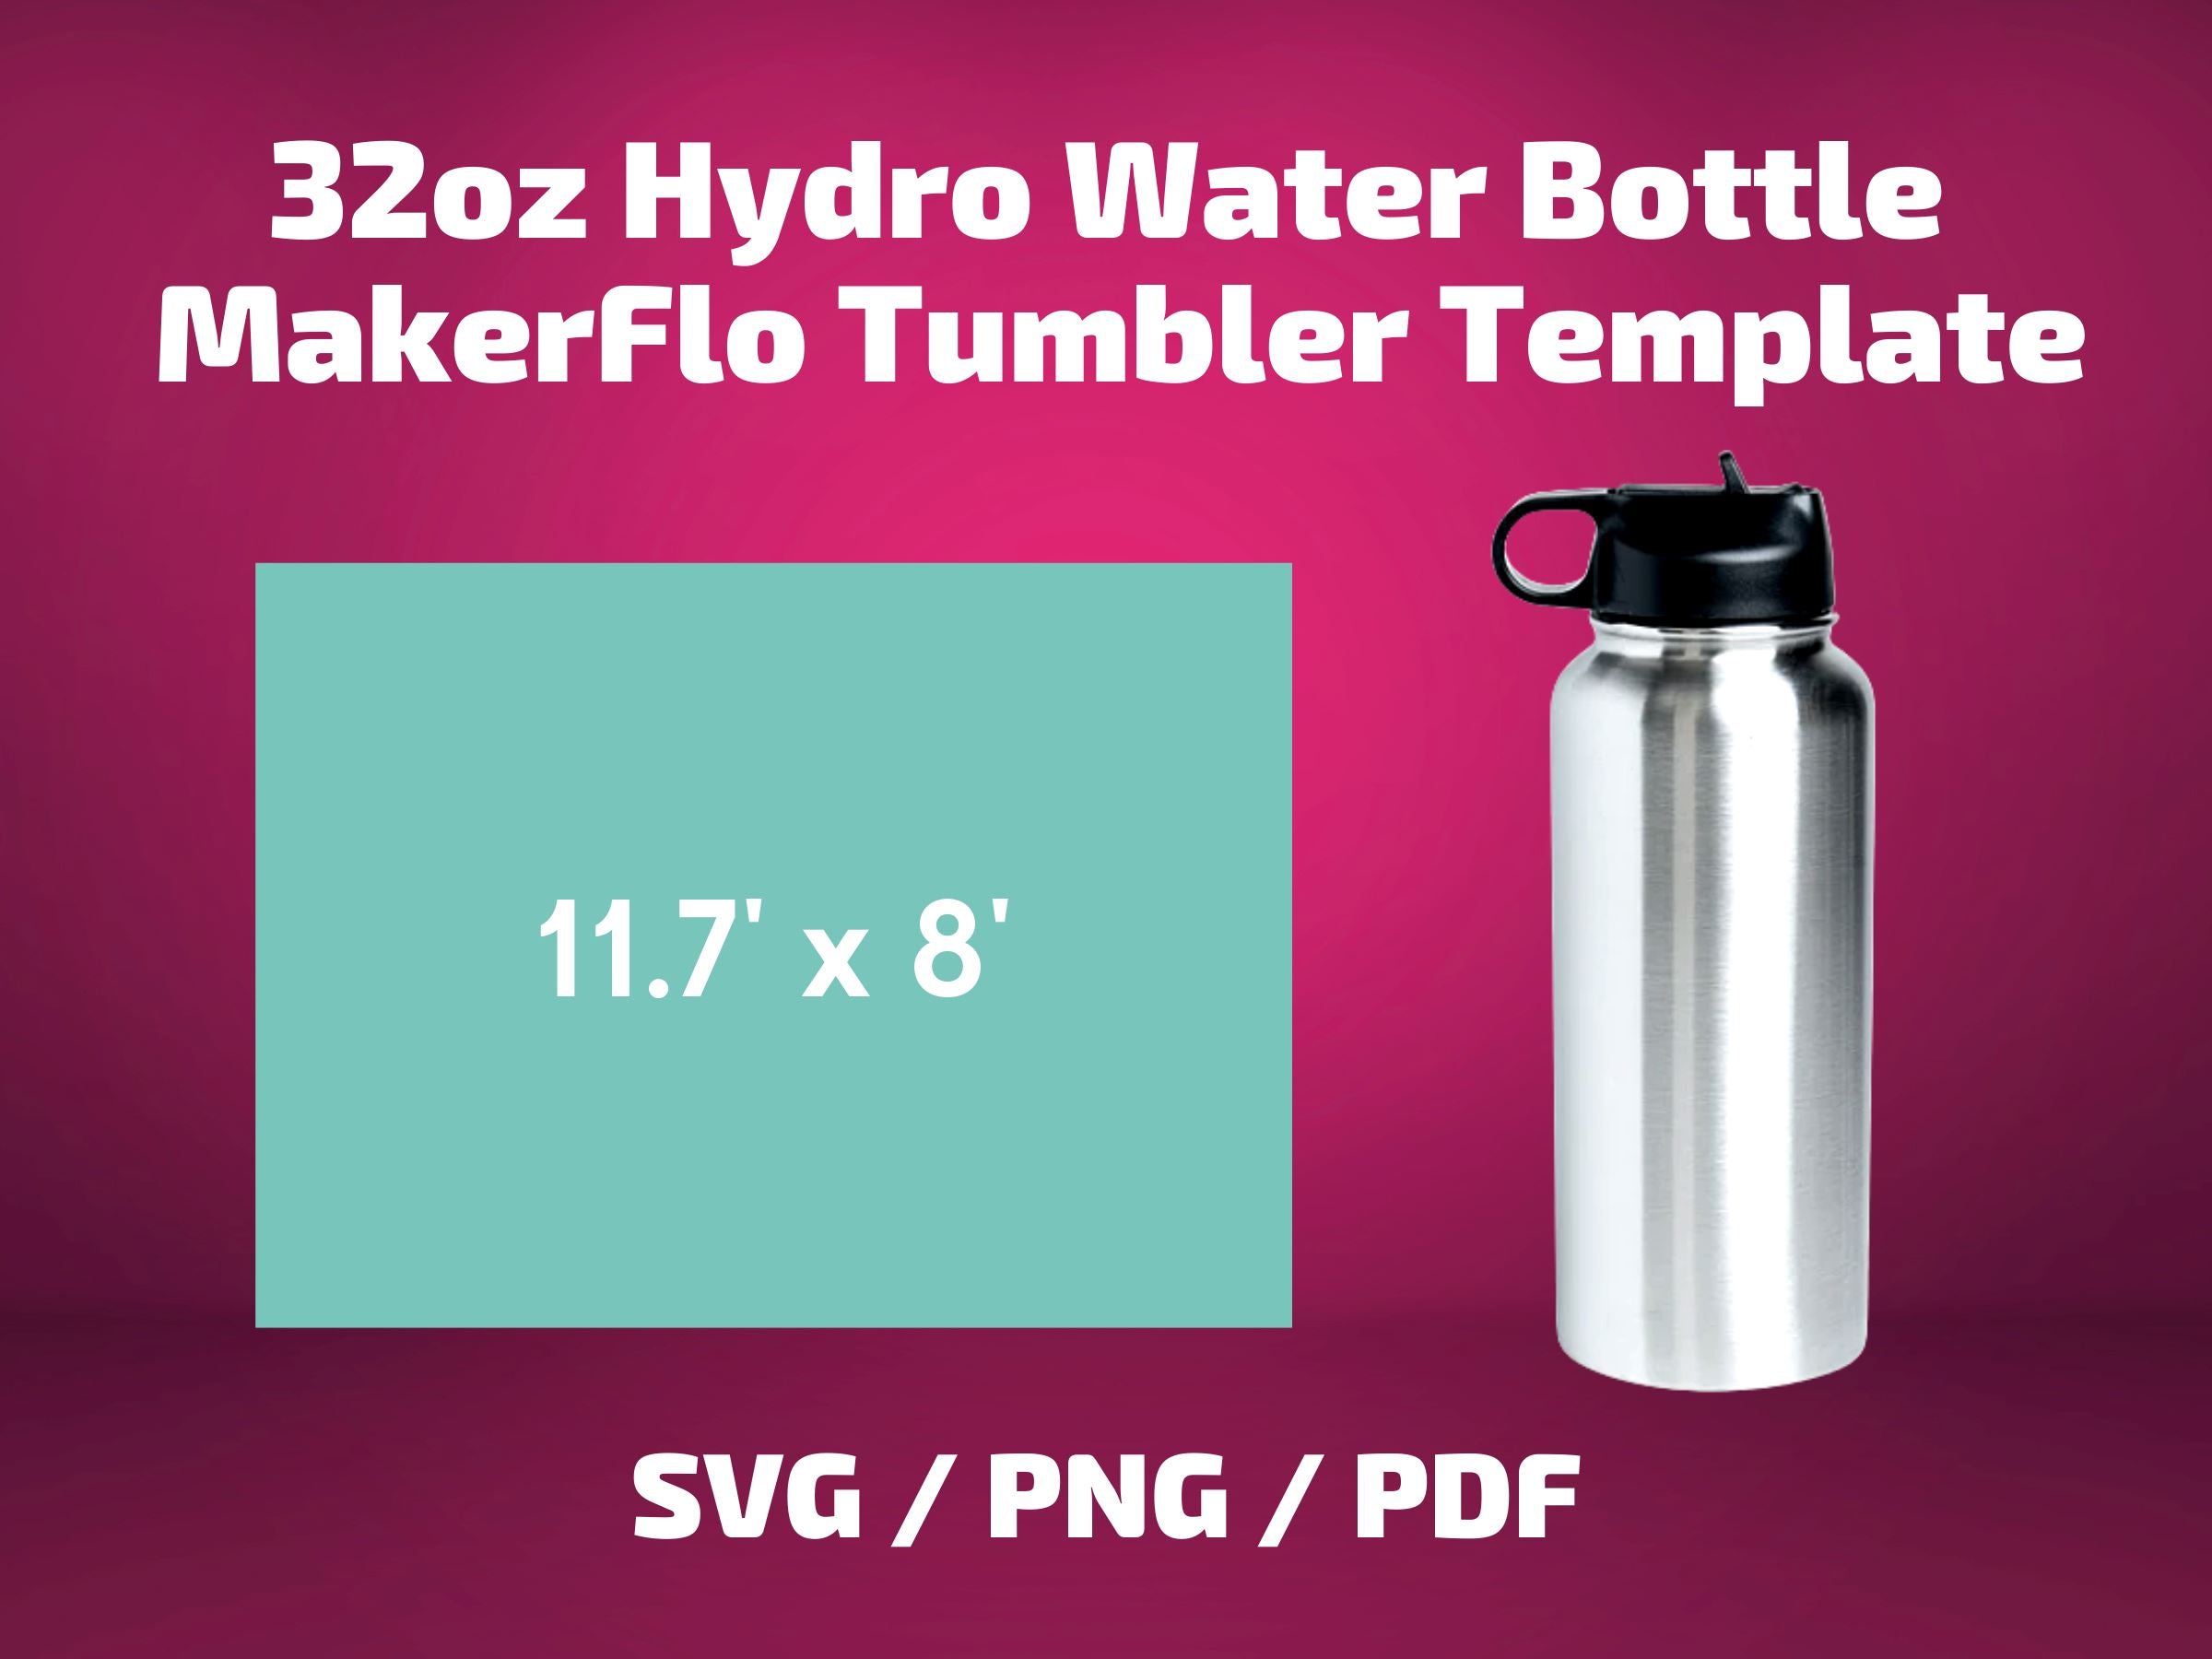 Hydro Flask Tumbler Product Video 